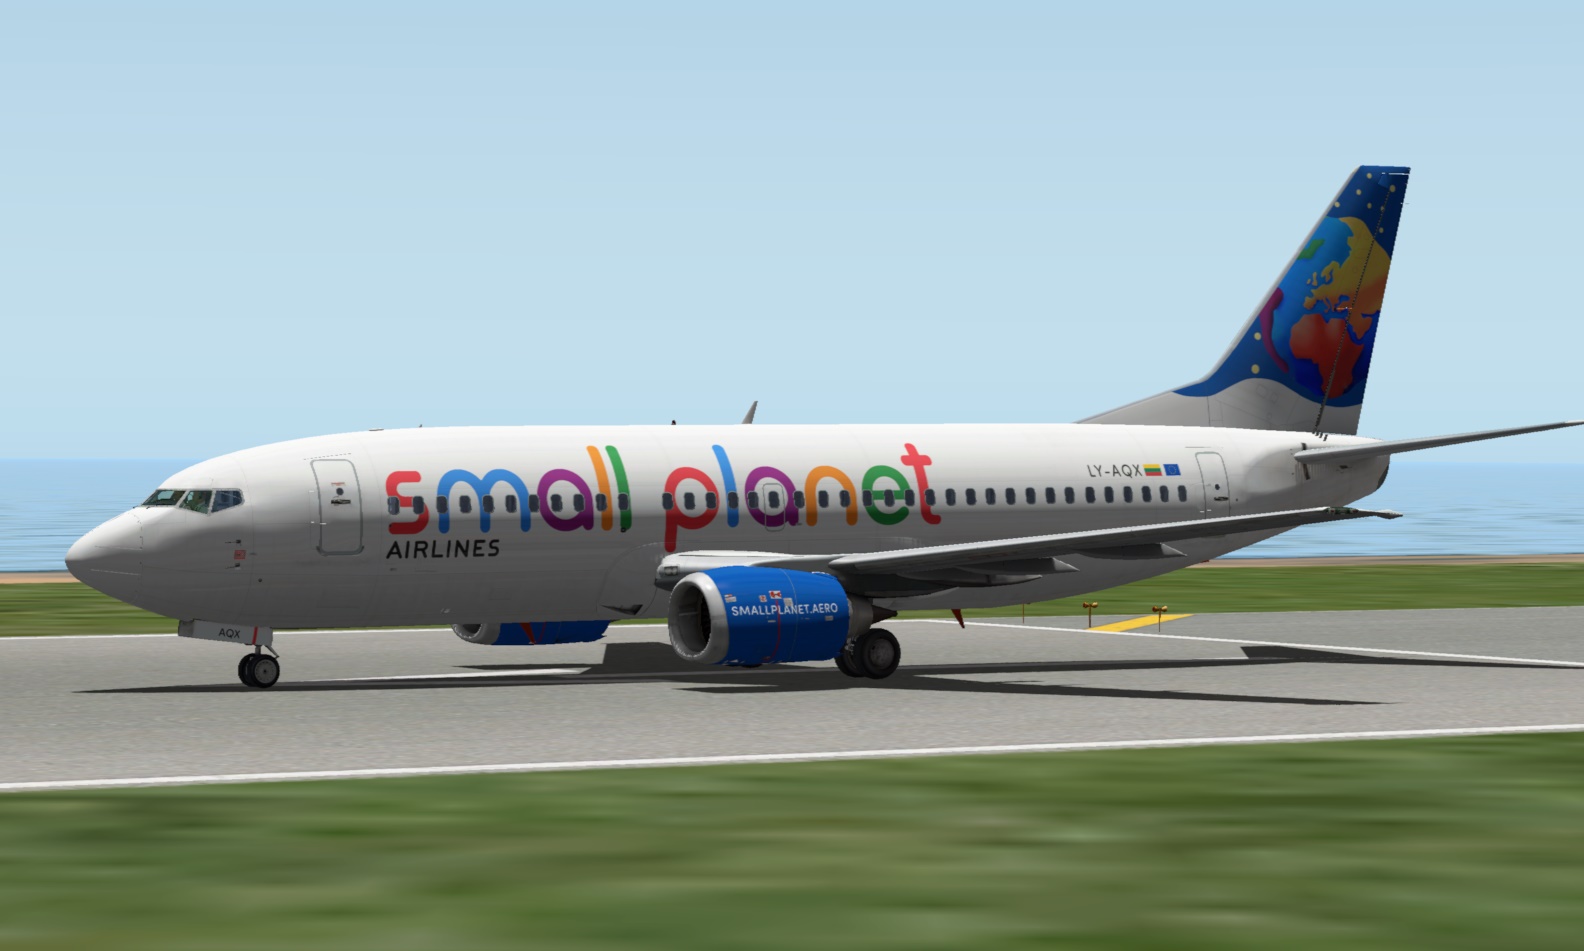 More information about "Small Planet Airlines livery Boeing 733 IXEG"